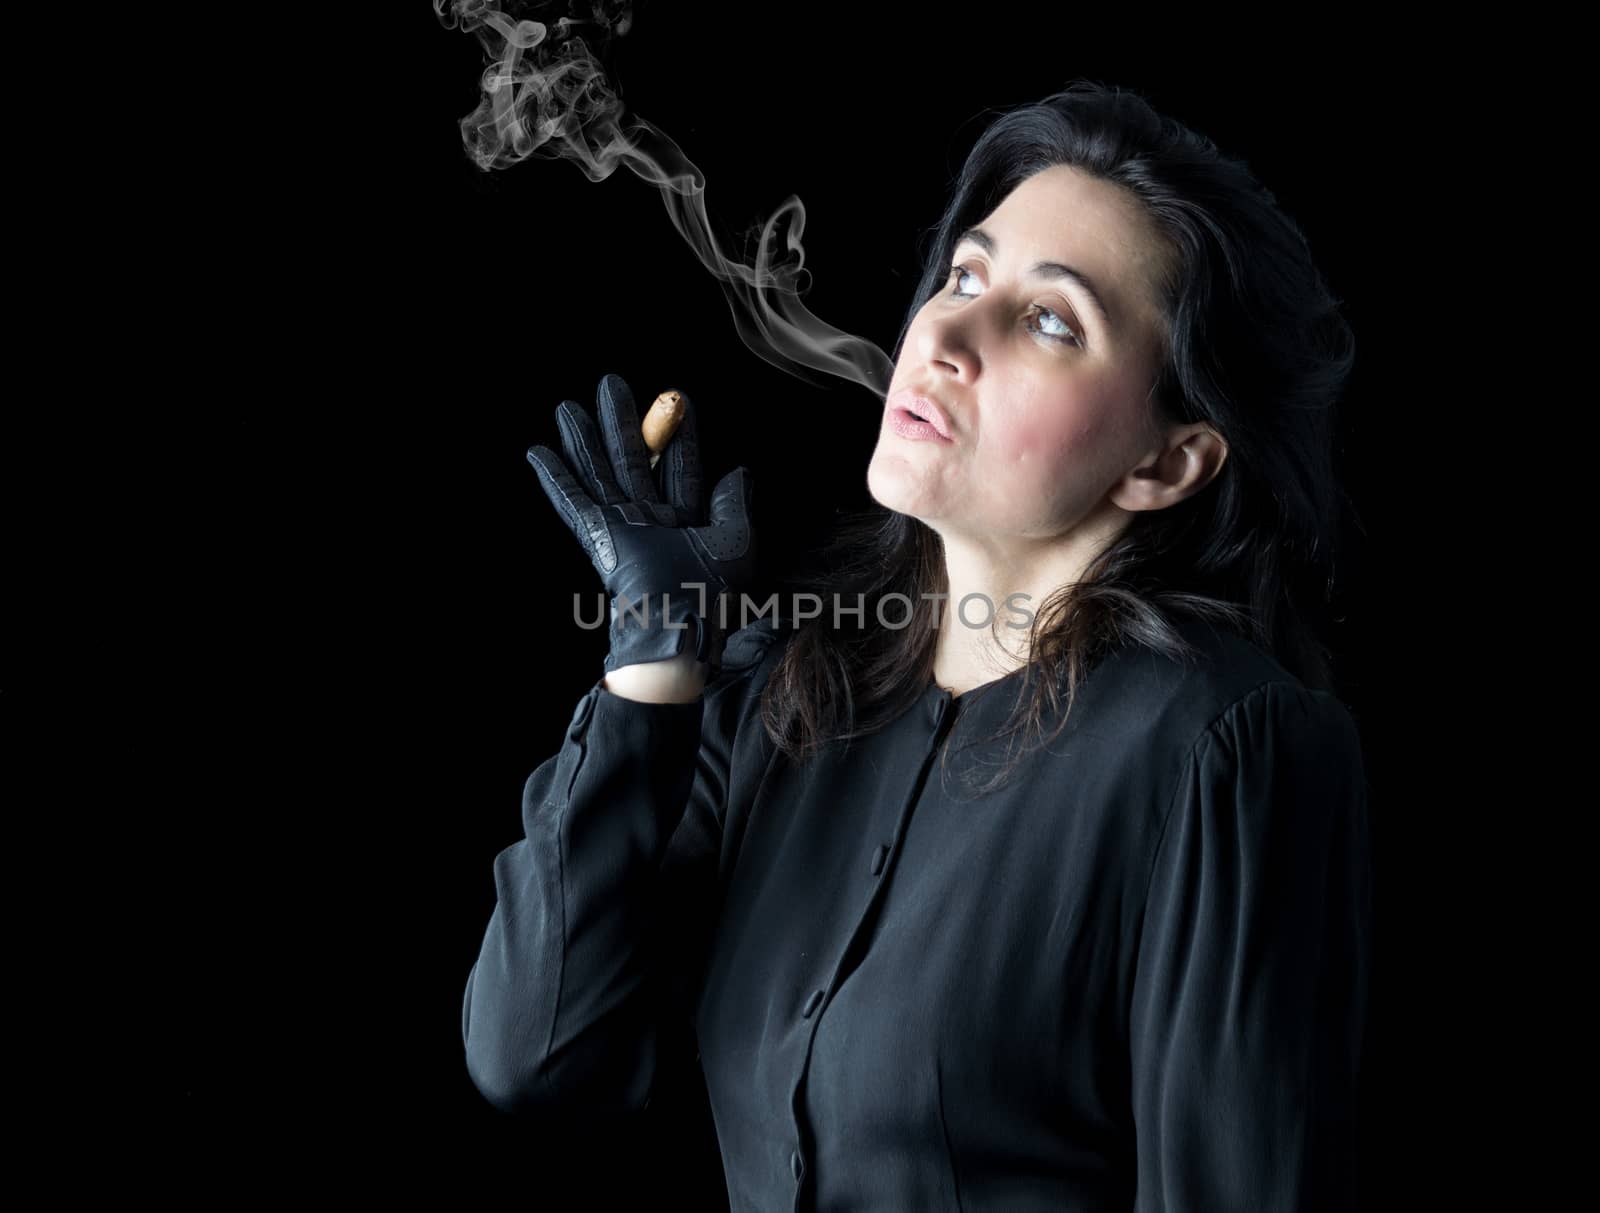 Brunette woman in black dress and black gloves standing in front of a black backdrop, holding a cigar in one hand and blowing smoke.